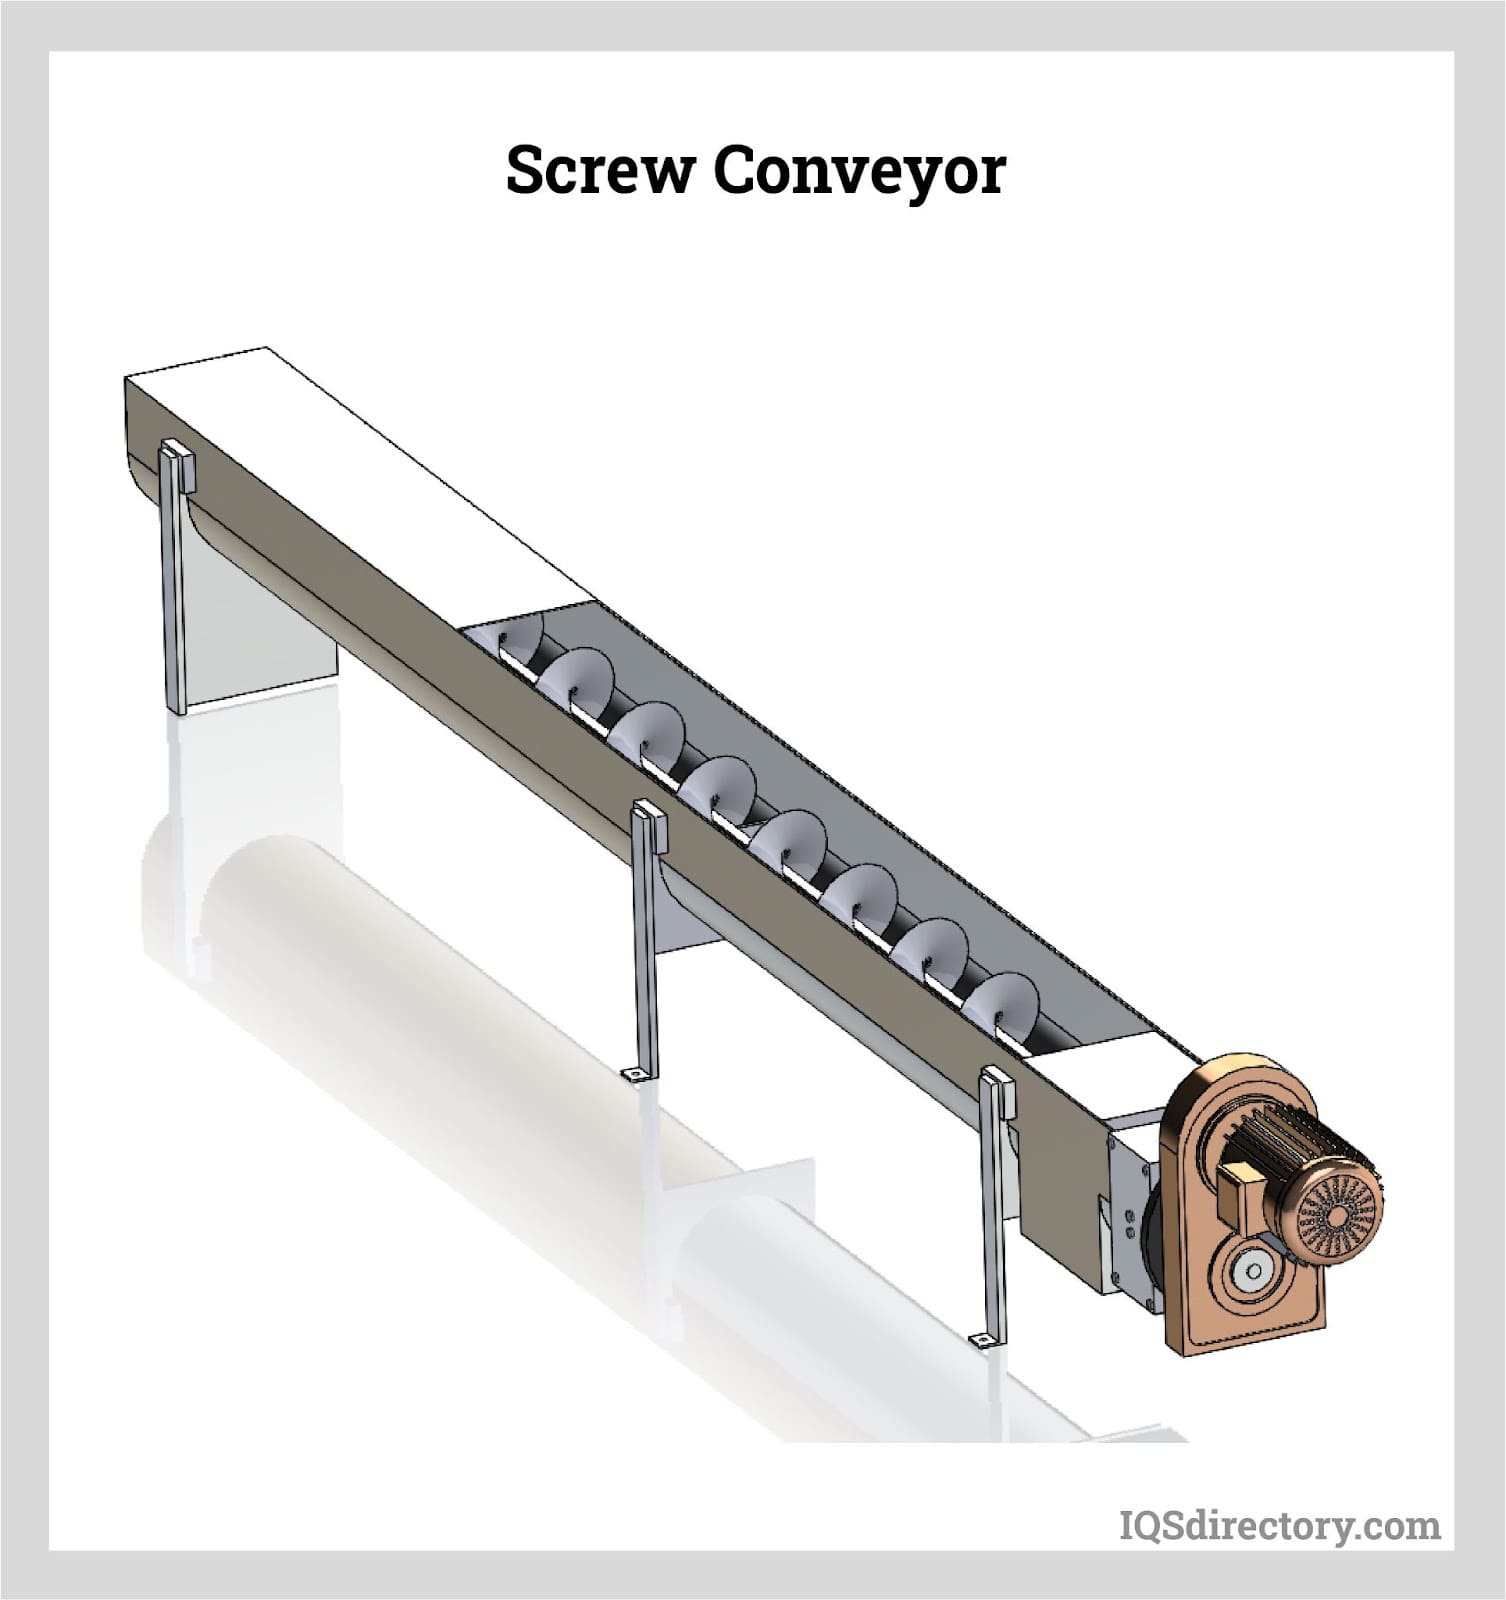 Screw Conveyor: What Is It? How Does It Work? Types, Uses